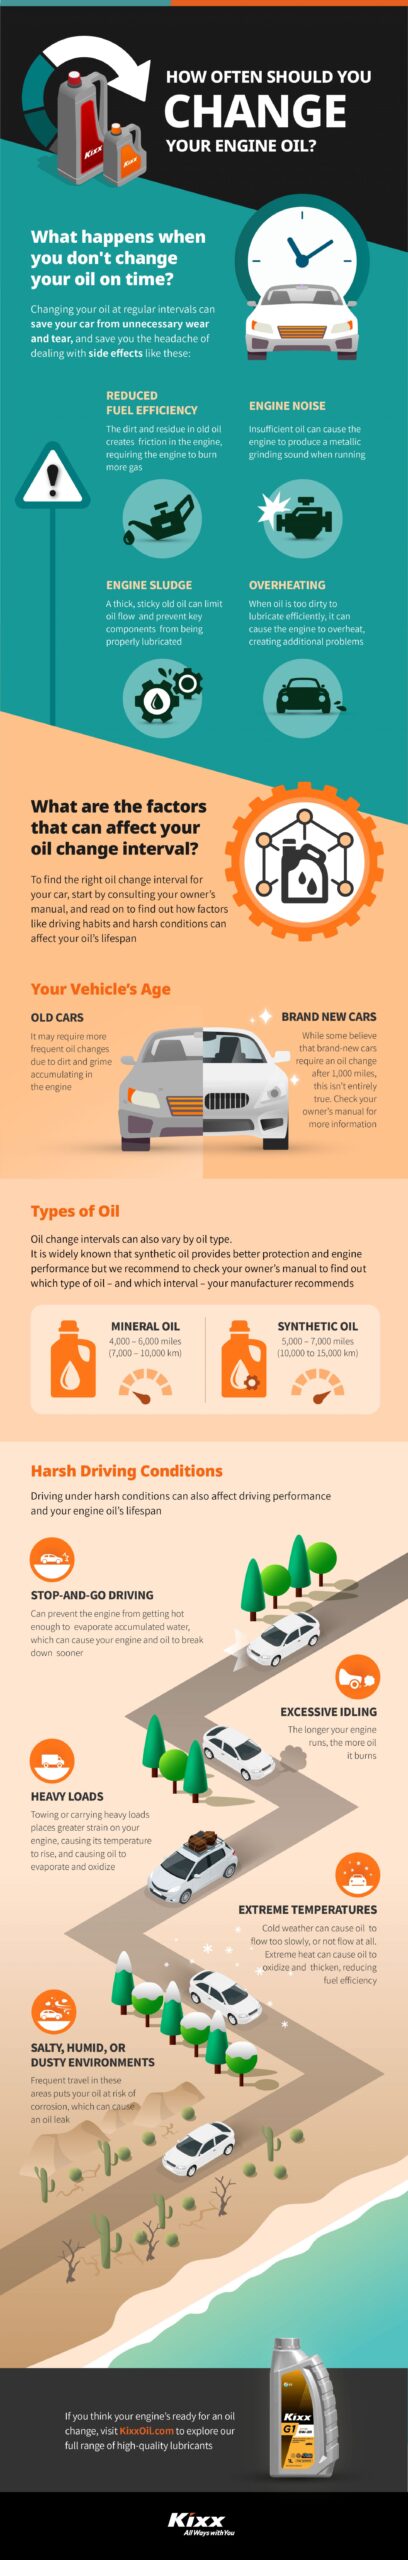 How Often Should You Change Your Engine Oil? https://news.kixxoil.com/how-often-should-you-change-your-engine-oil